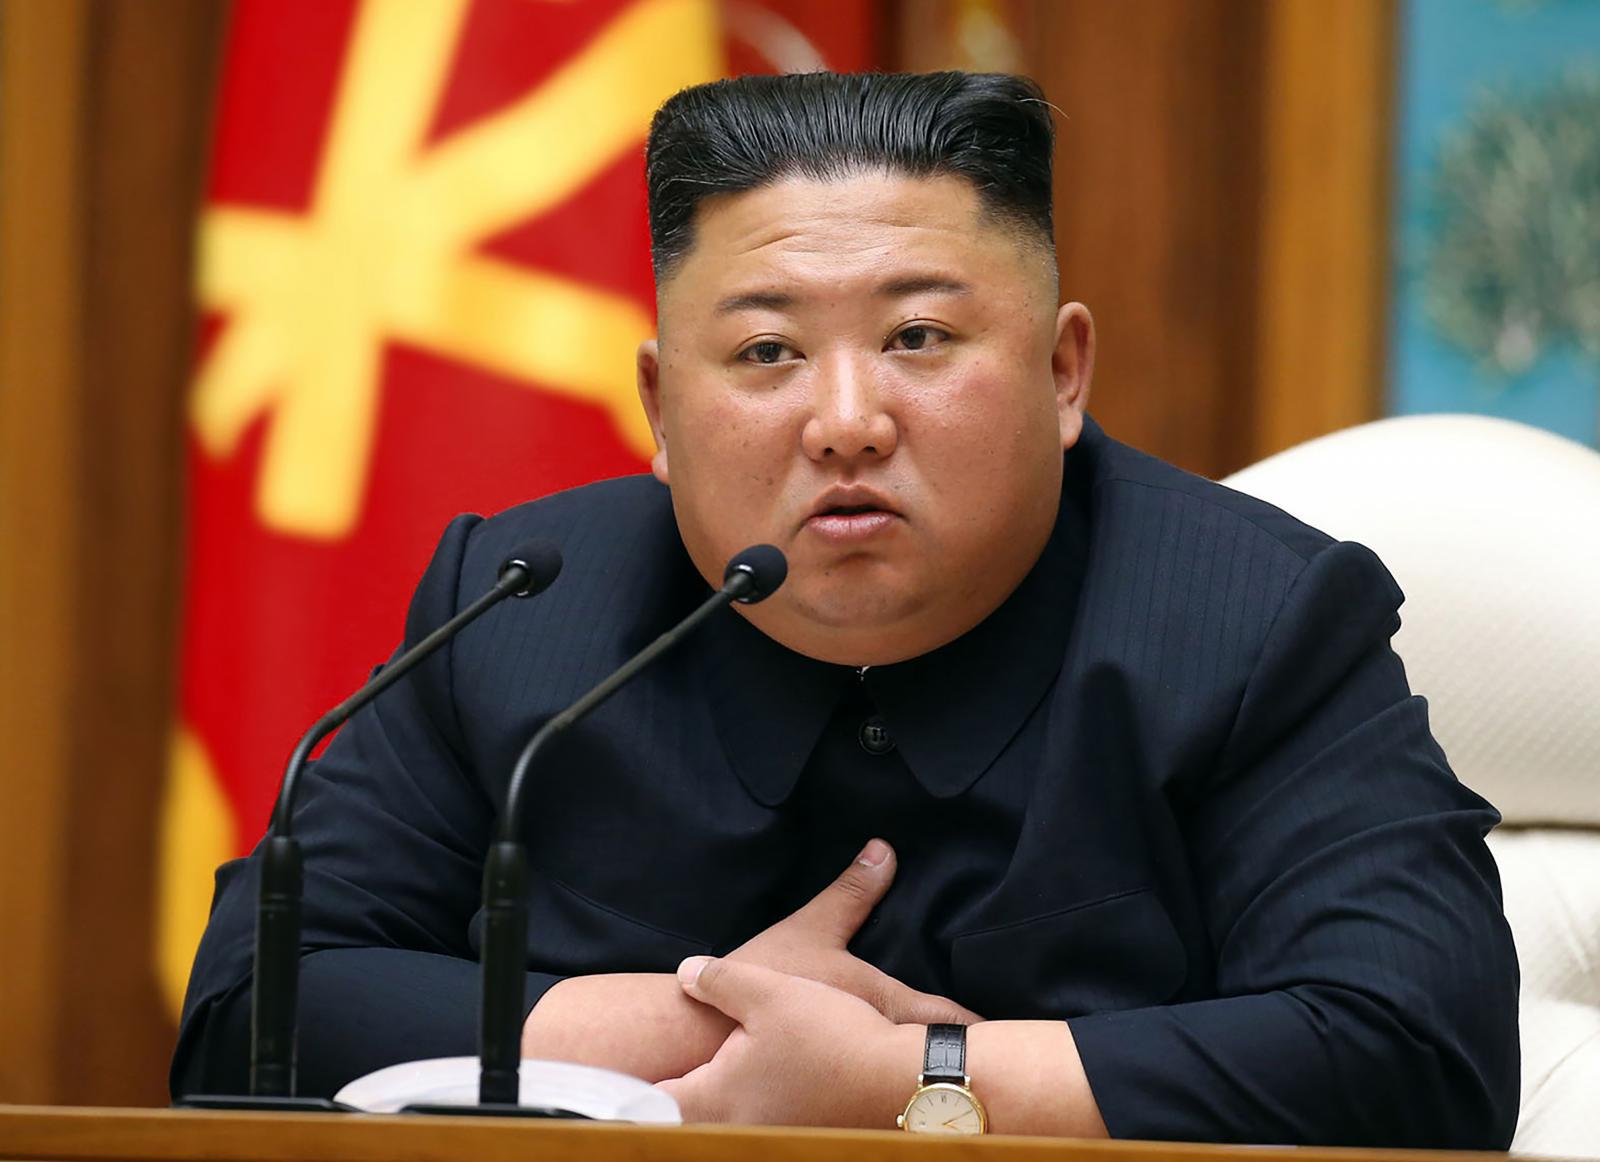 Kim Jong Un is the second-most famous person in the world in 2020, see why